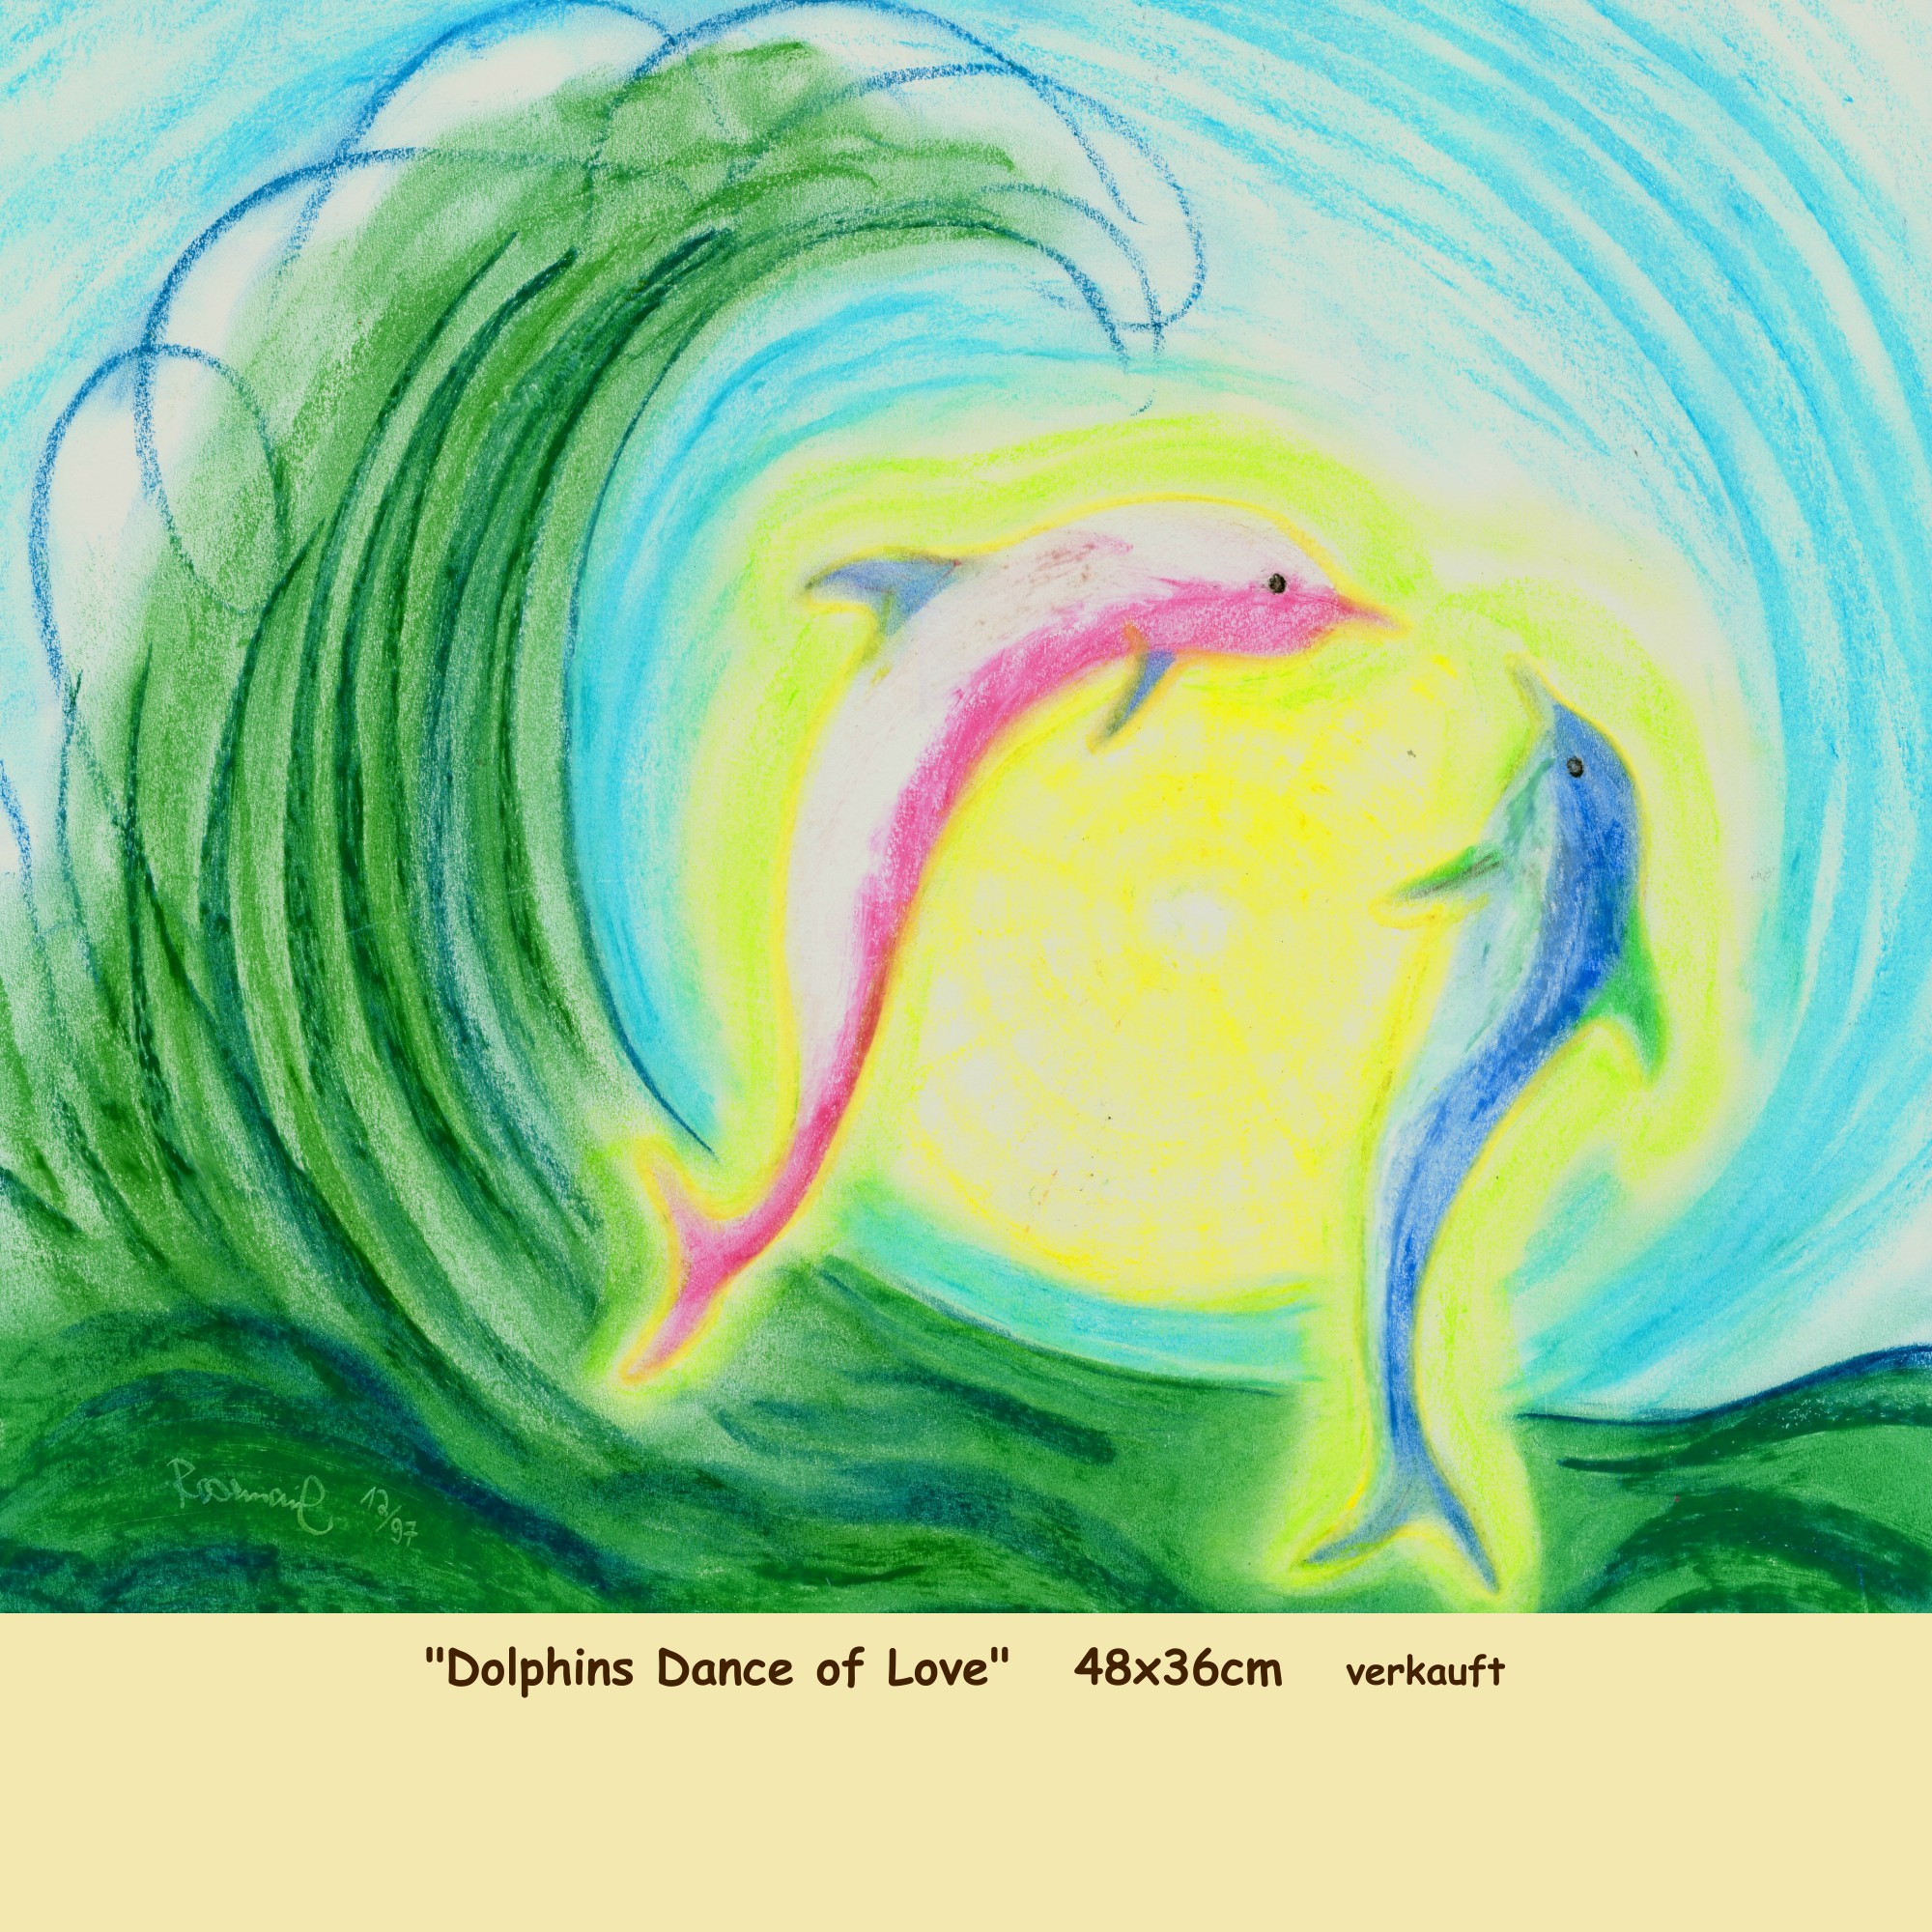 Dolphins Dance of Love